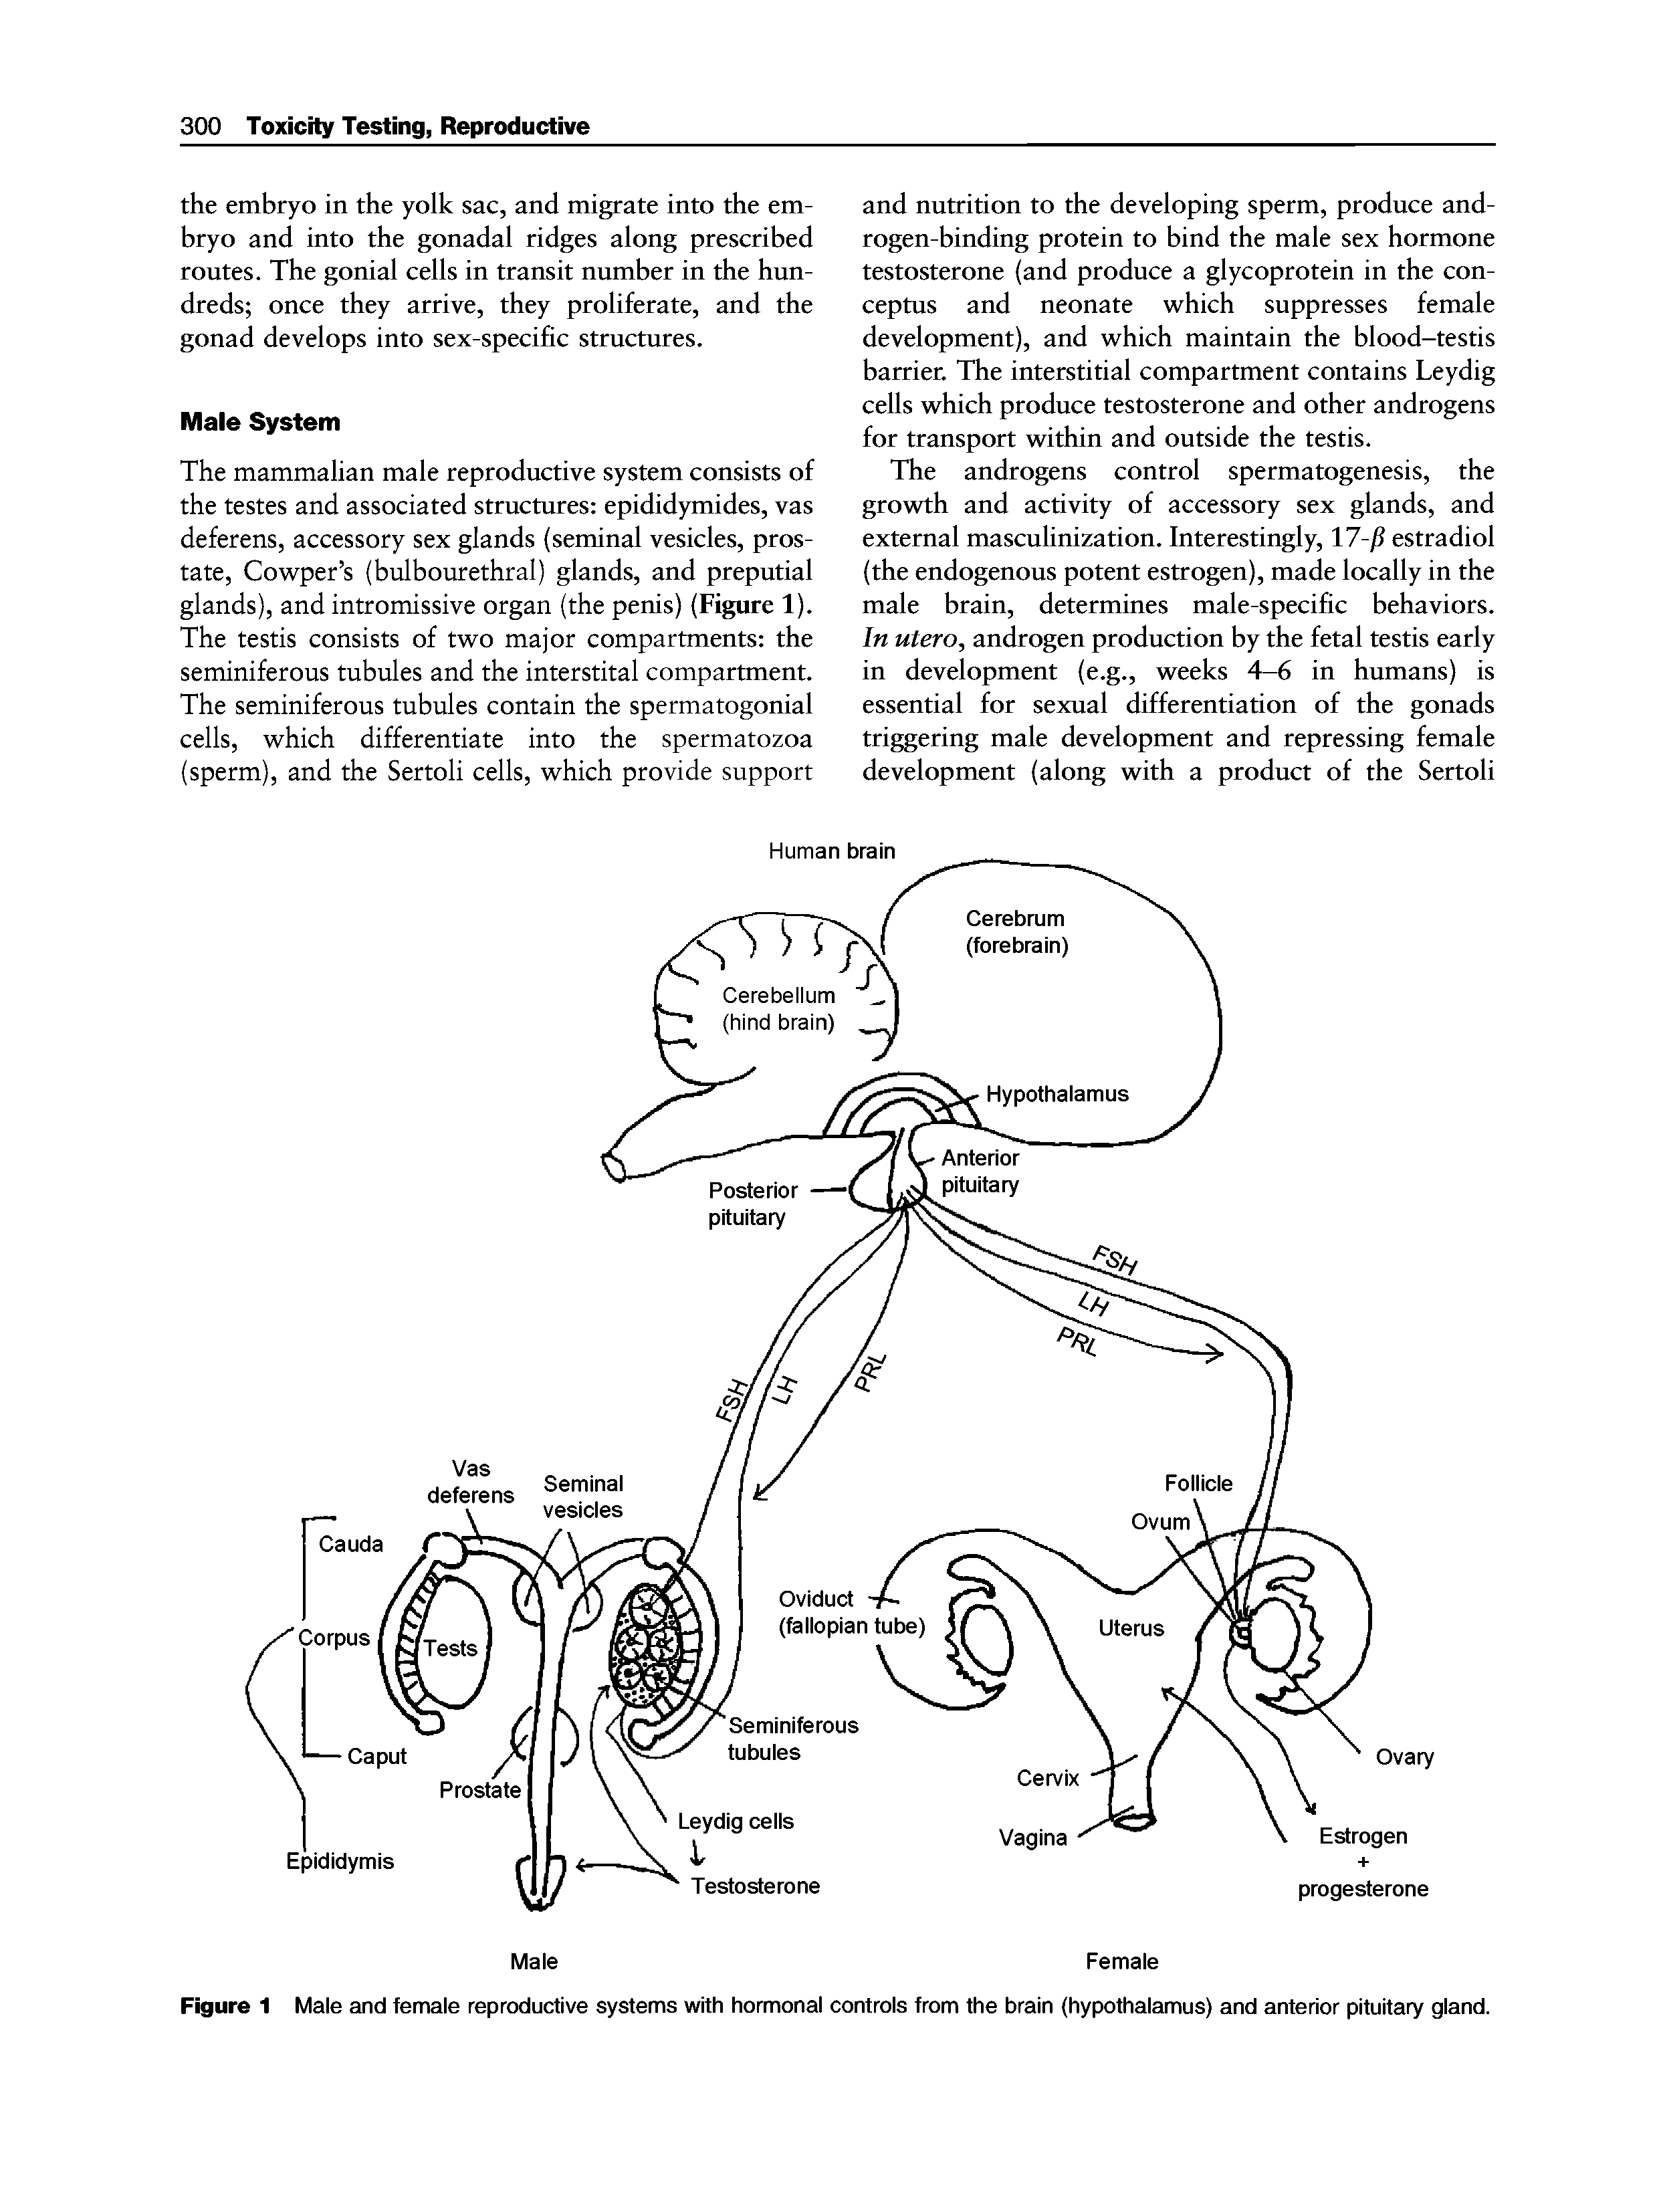 Figure 1 Male and female reproductive systems with hormonal controls from the brain (hypothalamus) and anterior pituitary gland.